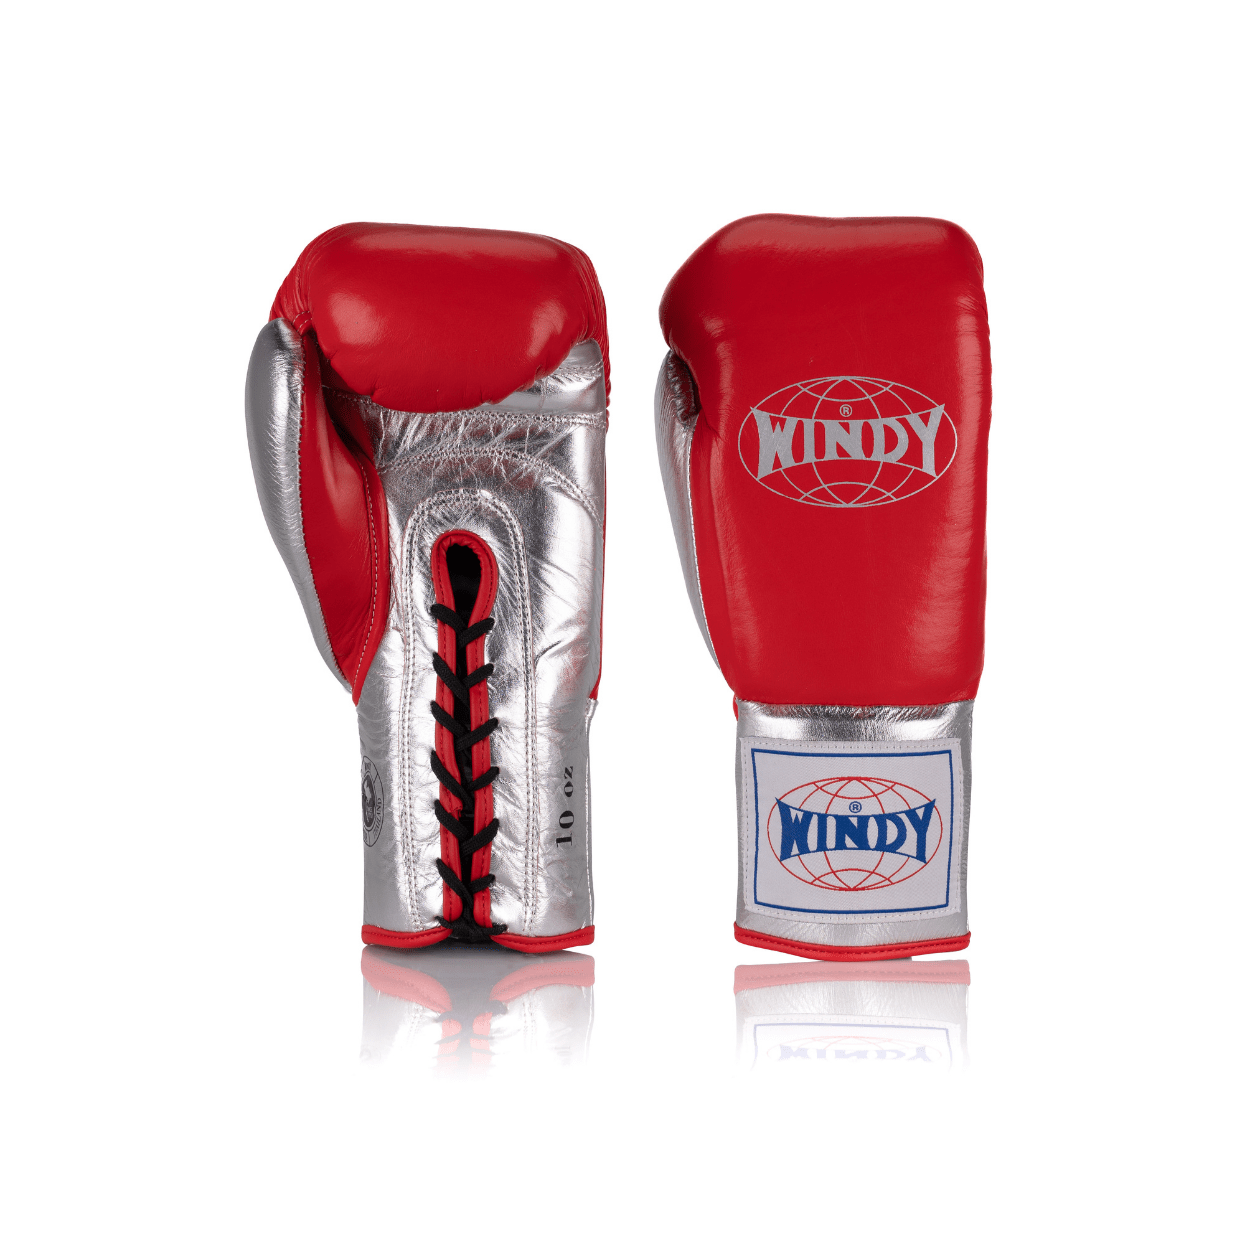 BGCGL Competition leather boxing glove - Red/Silver - Windy Fight Gear B.V.